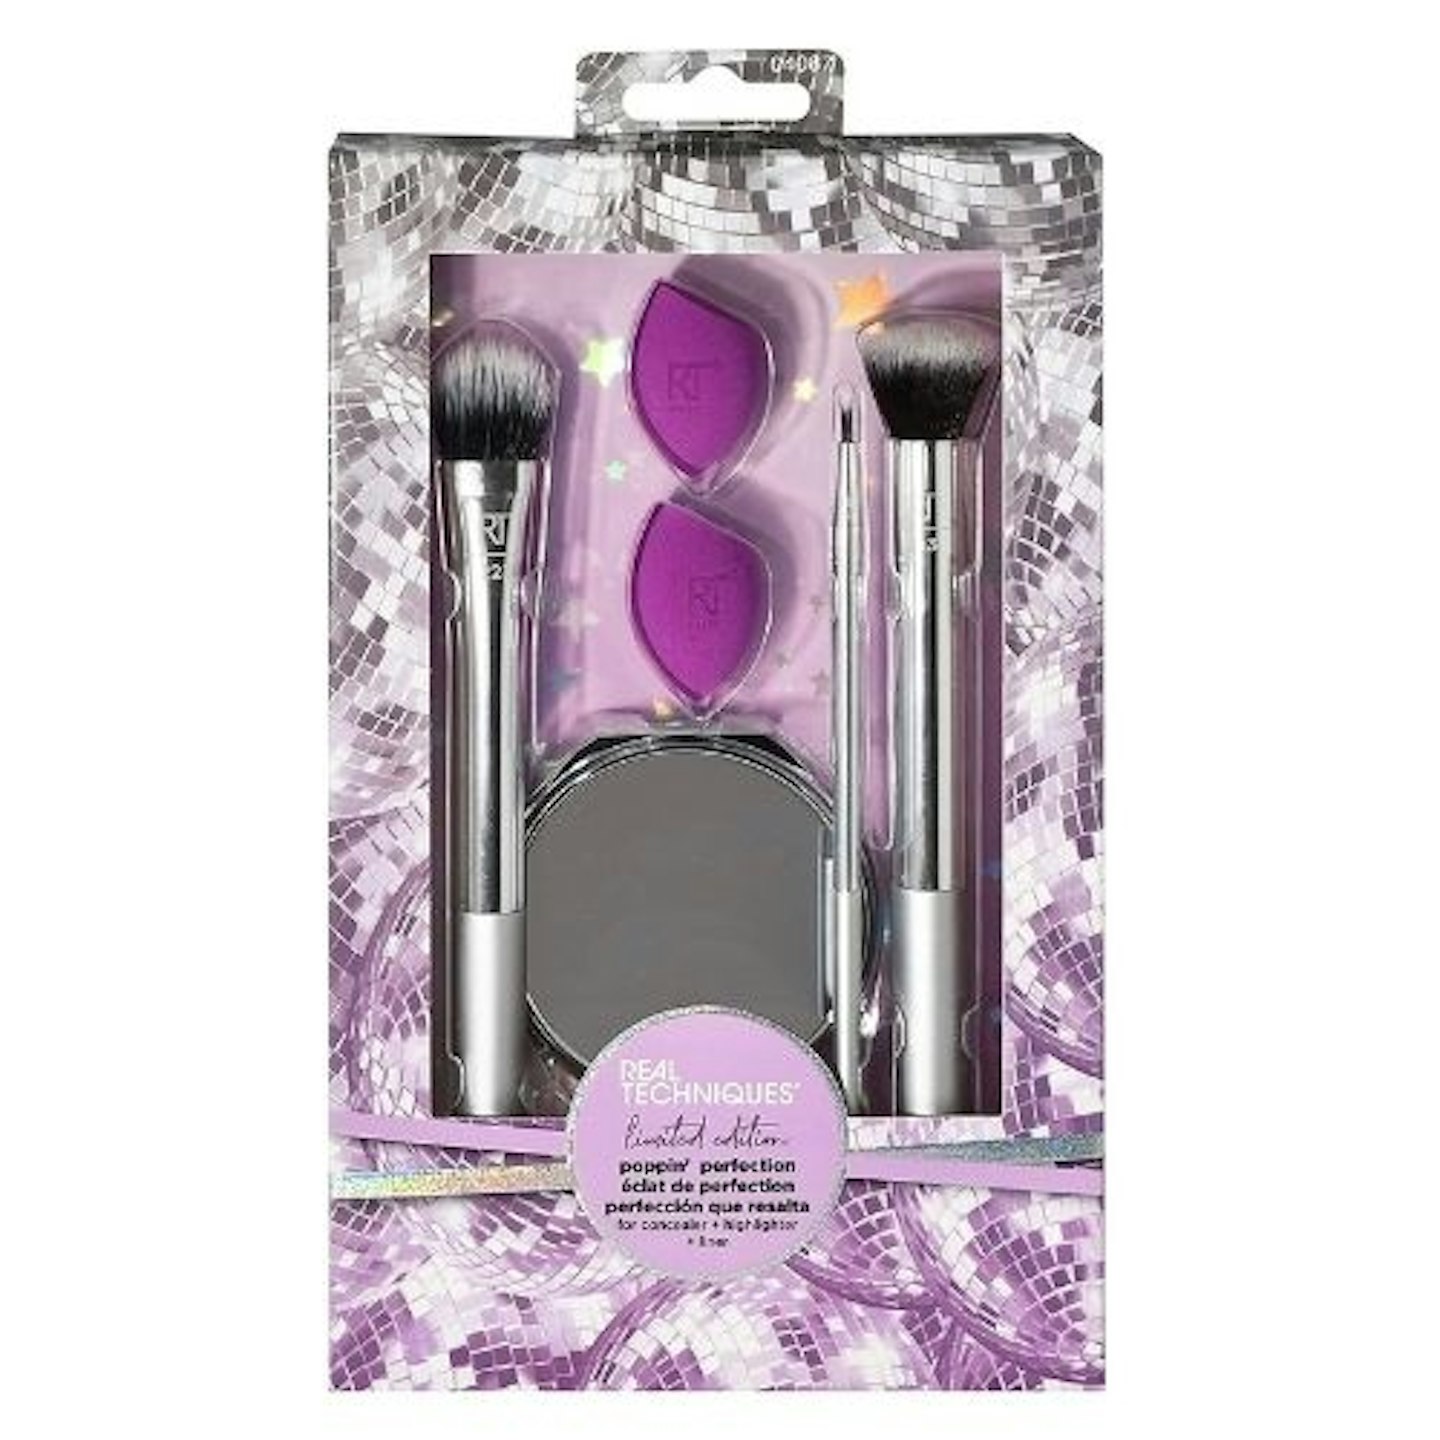 Real Techniques Poppin' Perfection and Sponge Make-Up Brush Set with Compact Mirror